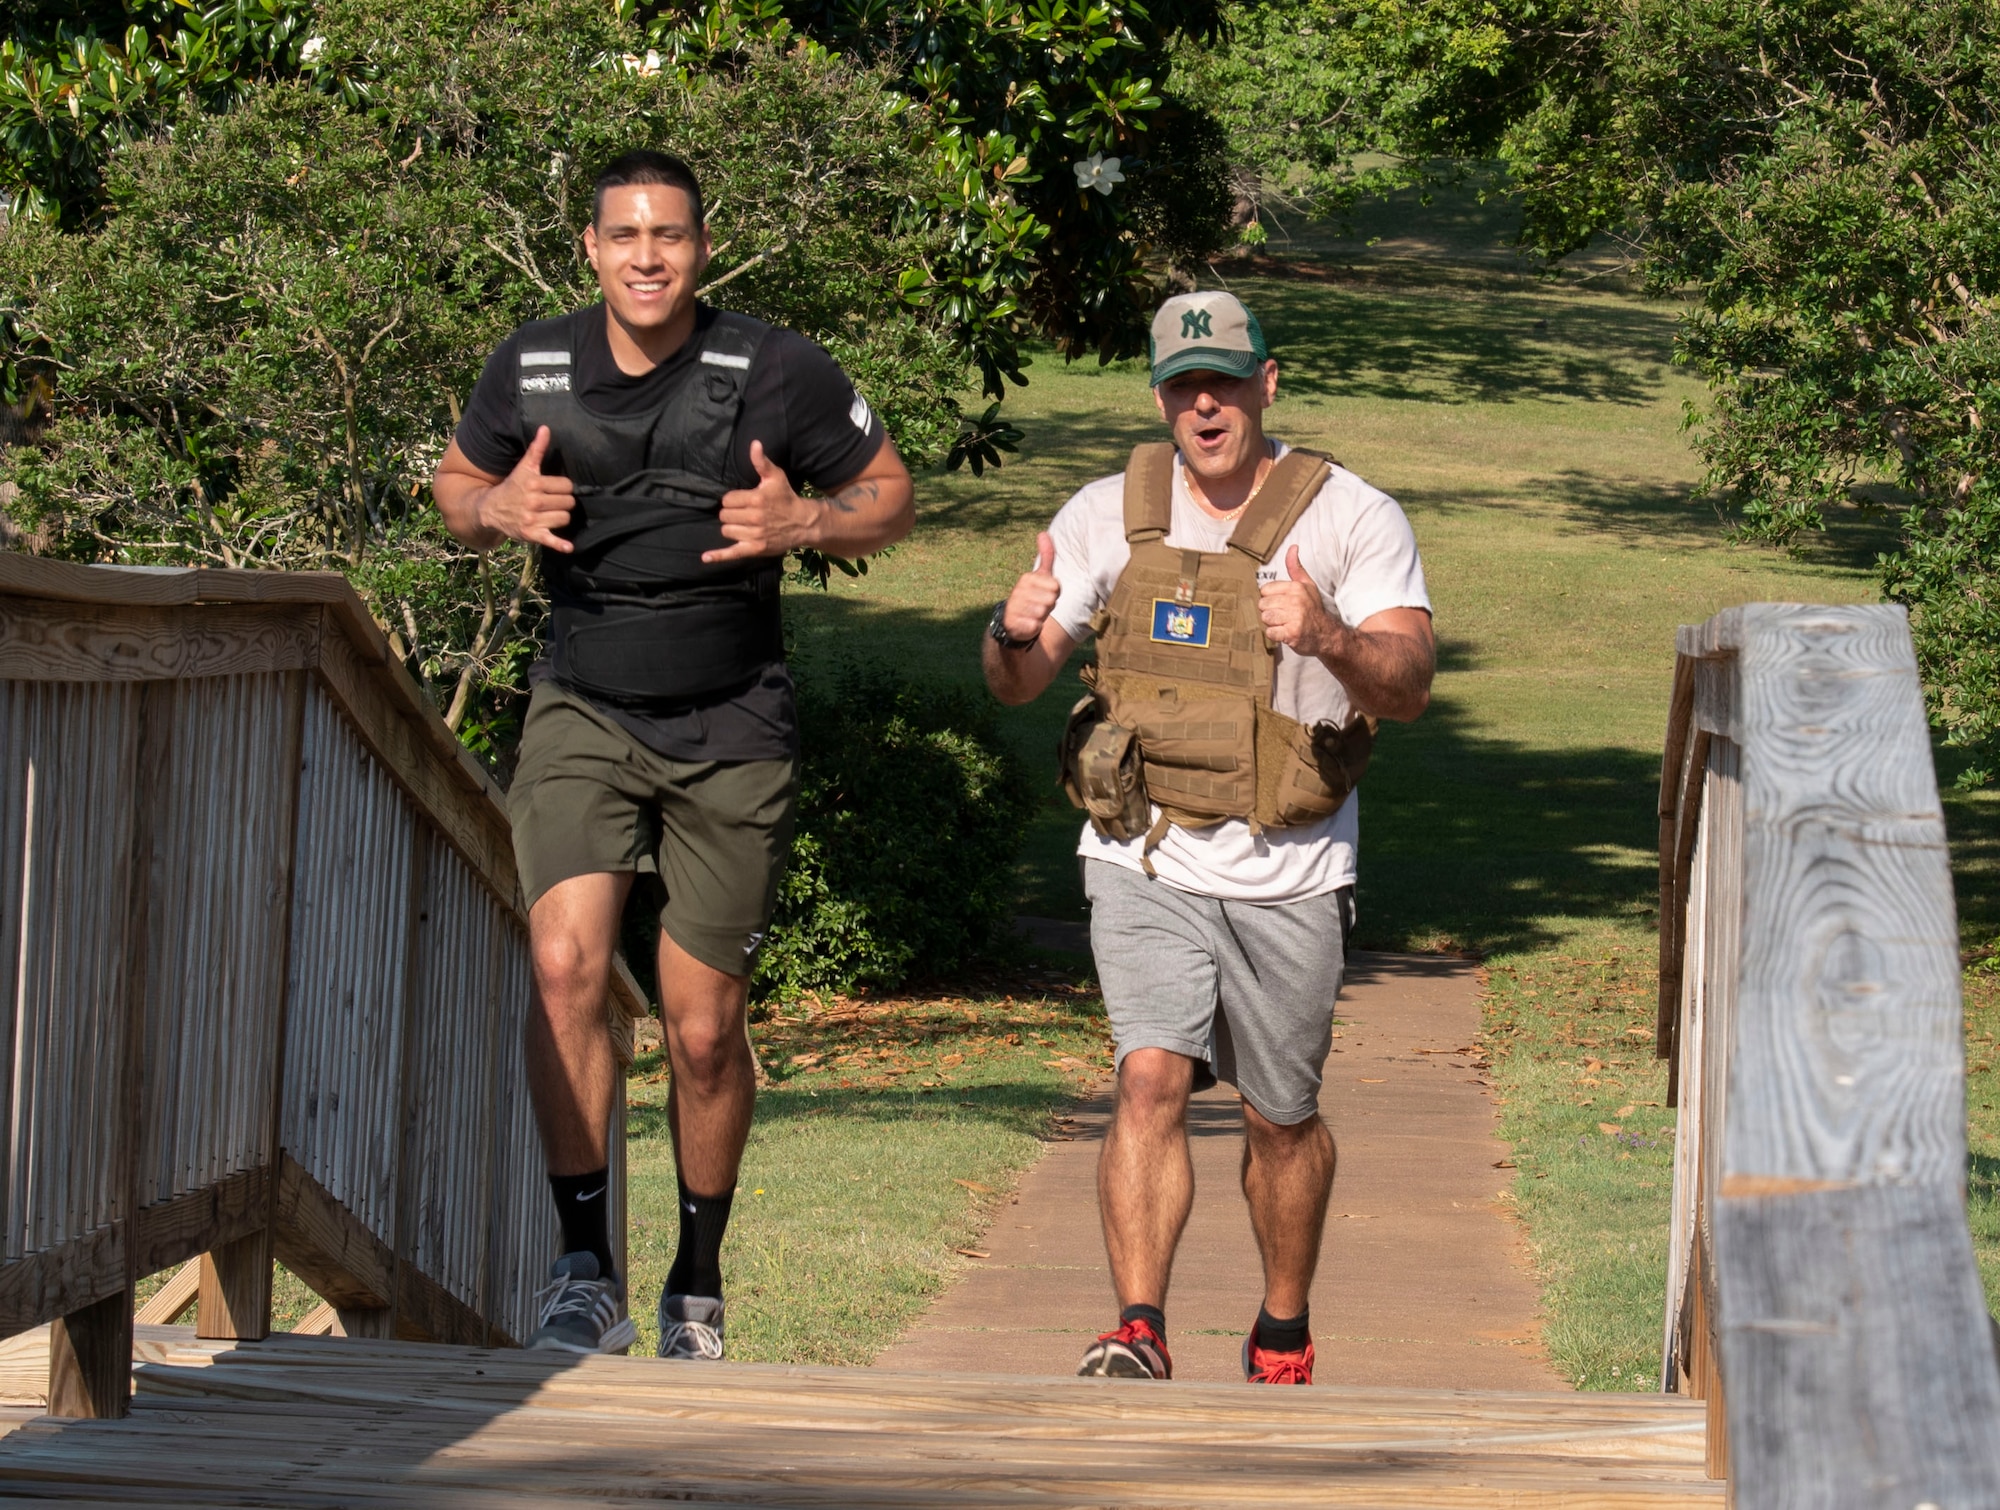 U.S. U.S. Staff Sgt. Carlos Wooten, 20th Fighter Wing (FW) religious affairs Airman, left, and Maj. Nicholas Lopresto, 20th Fighter Wing chaplain, participate in a “Murph challenge” complete their second 1-mile run at Memorial Lake, Shaw Air Force Base, South Carolina, May 28, 2019.